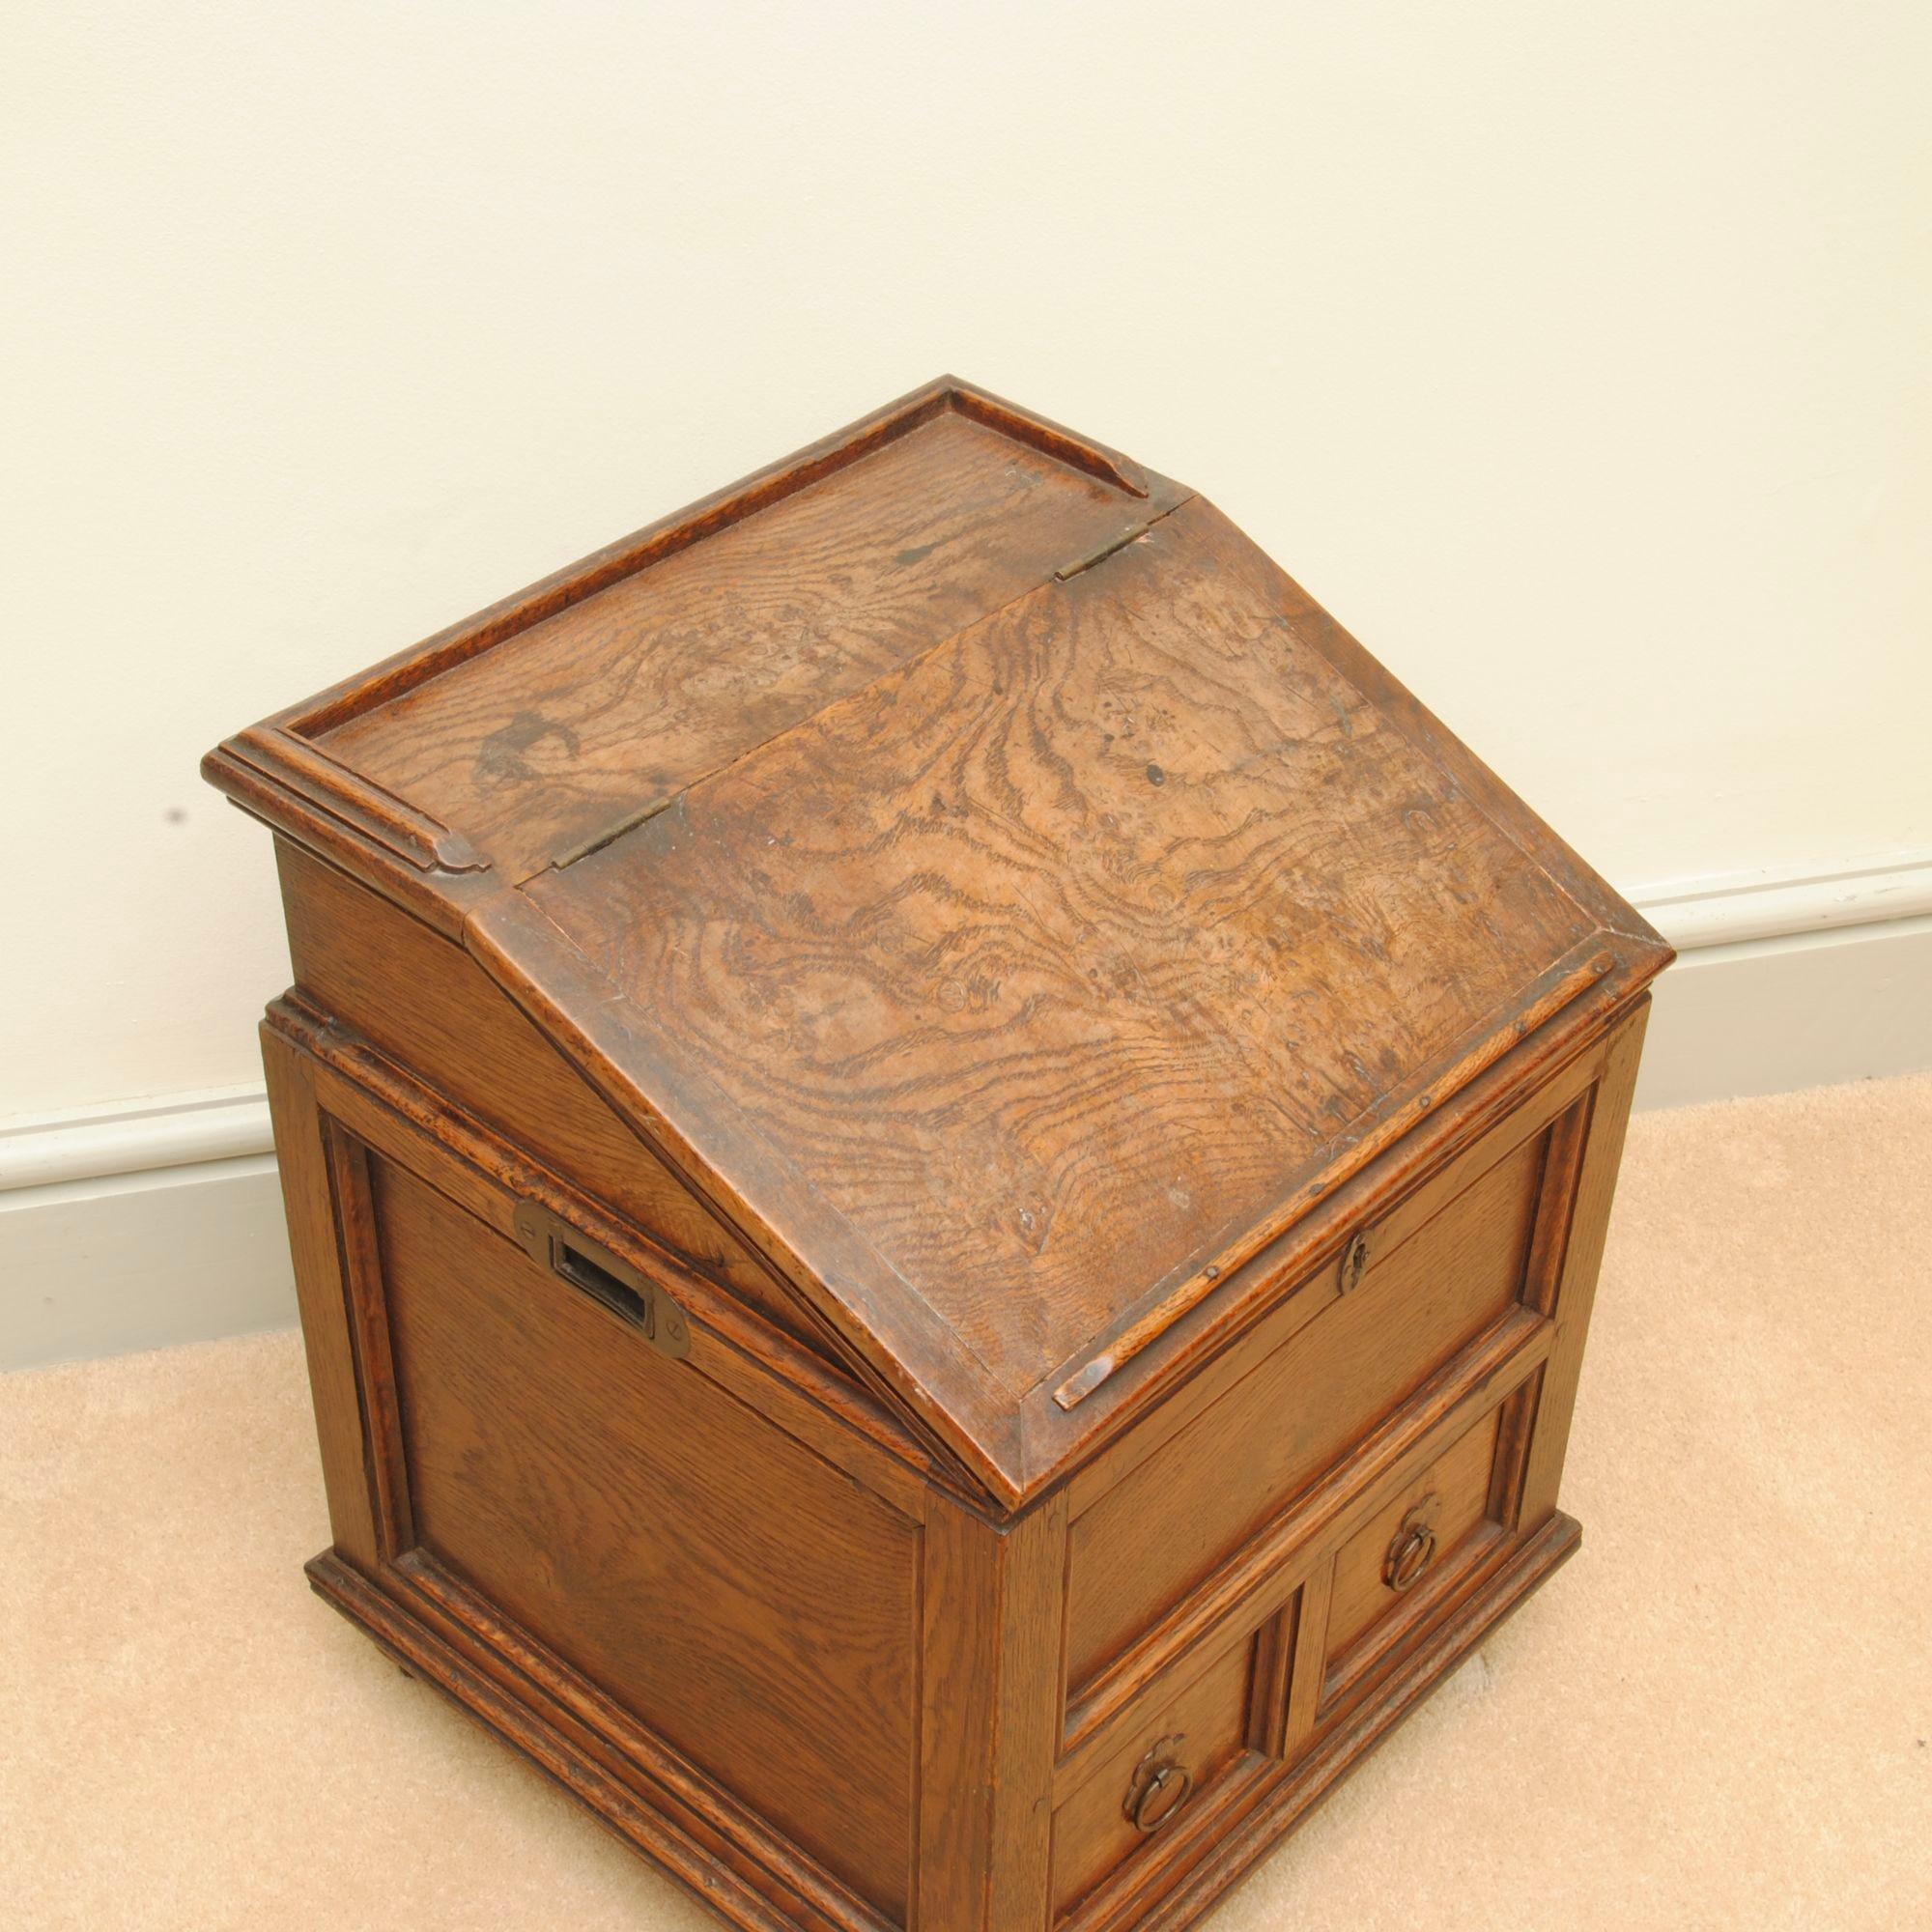 Charming Georgian Elm Childs Desk In Good Condition For Sale In Lincolnshire, GB